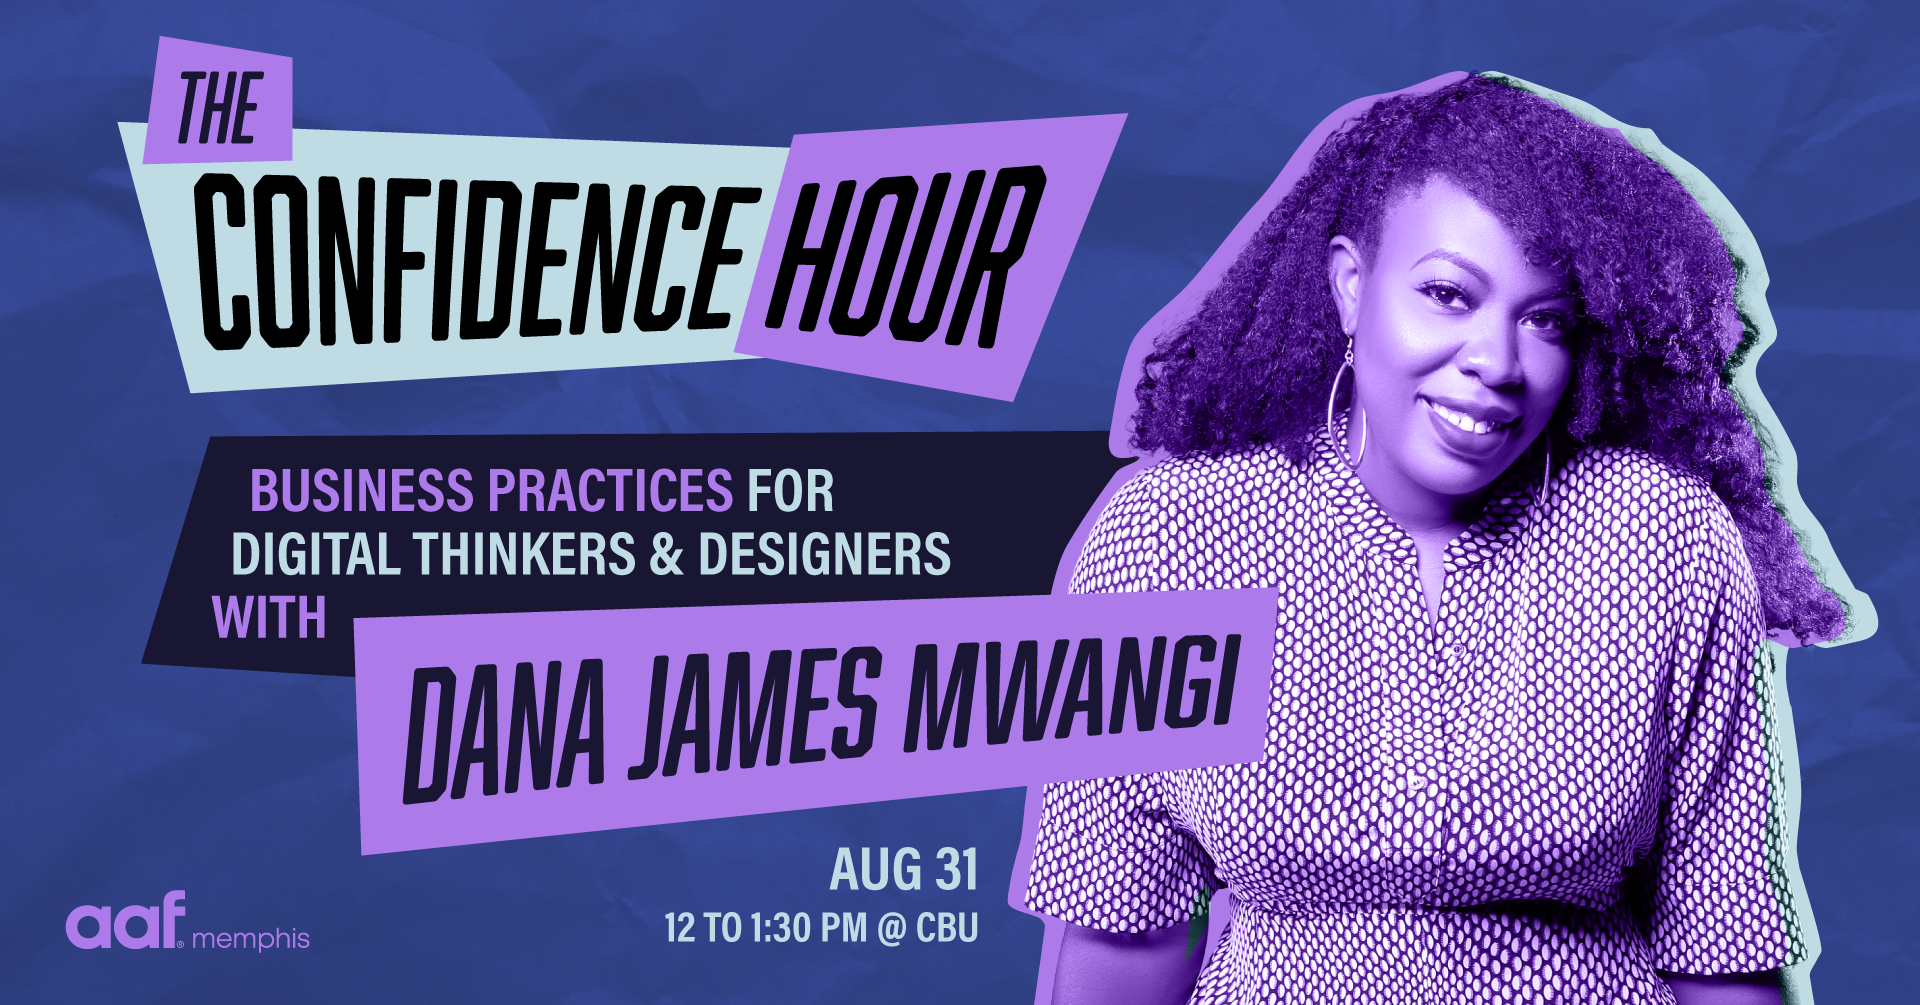 The Confidence Hour: Business Practices for Digital Thinkers & Designers with Dana James Mwangi. August 31, 12-1:30 PM CT at Christian Brothers University